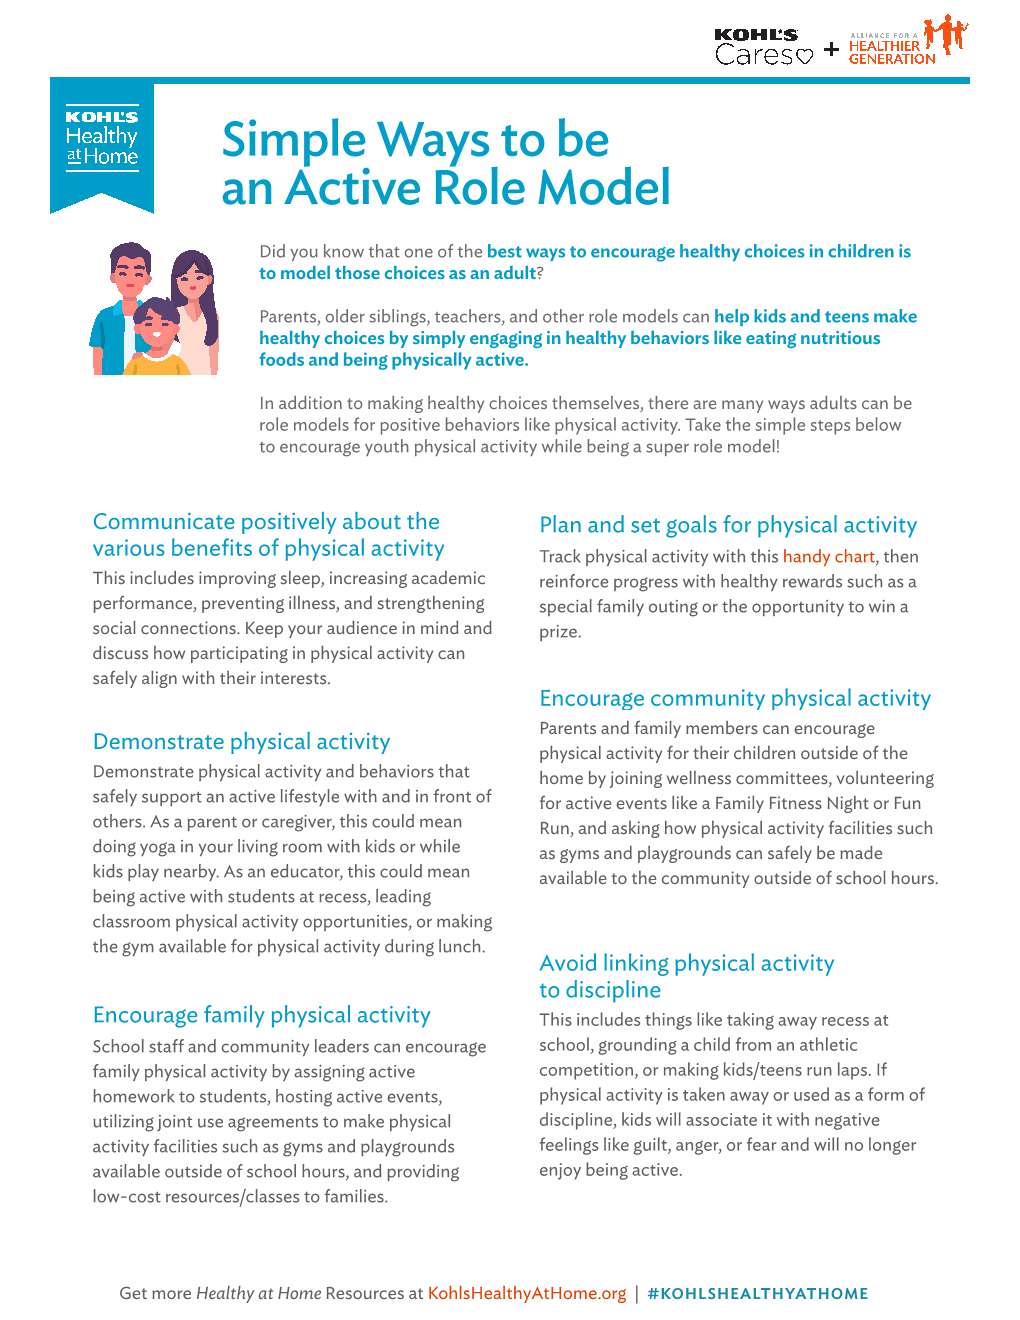 Simple Ways to Be an Active Role Model